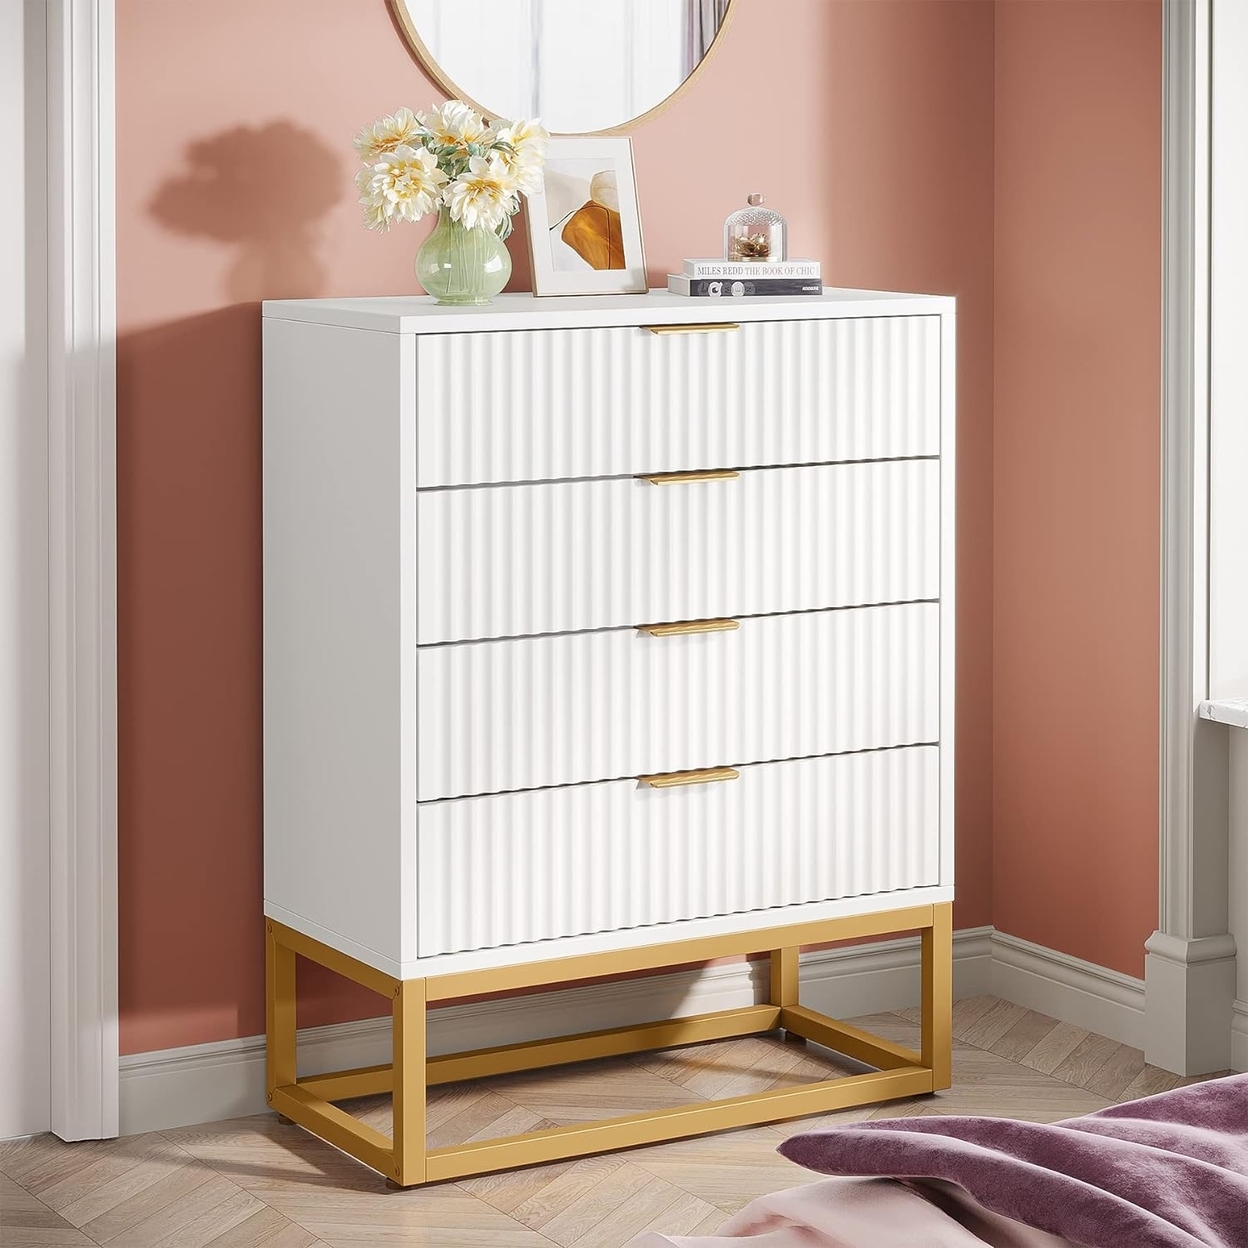 Tribesigns 4 Drawers Dresser, Modern Dressers With Fluted Panel And Metal Frame, Wood Storage Chest Of Drawers - White & Gold, 1pc